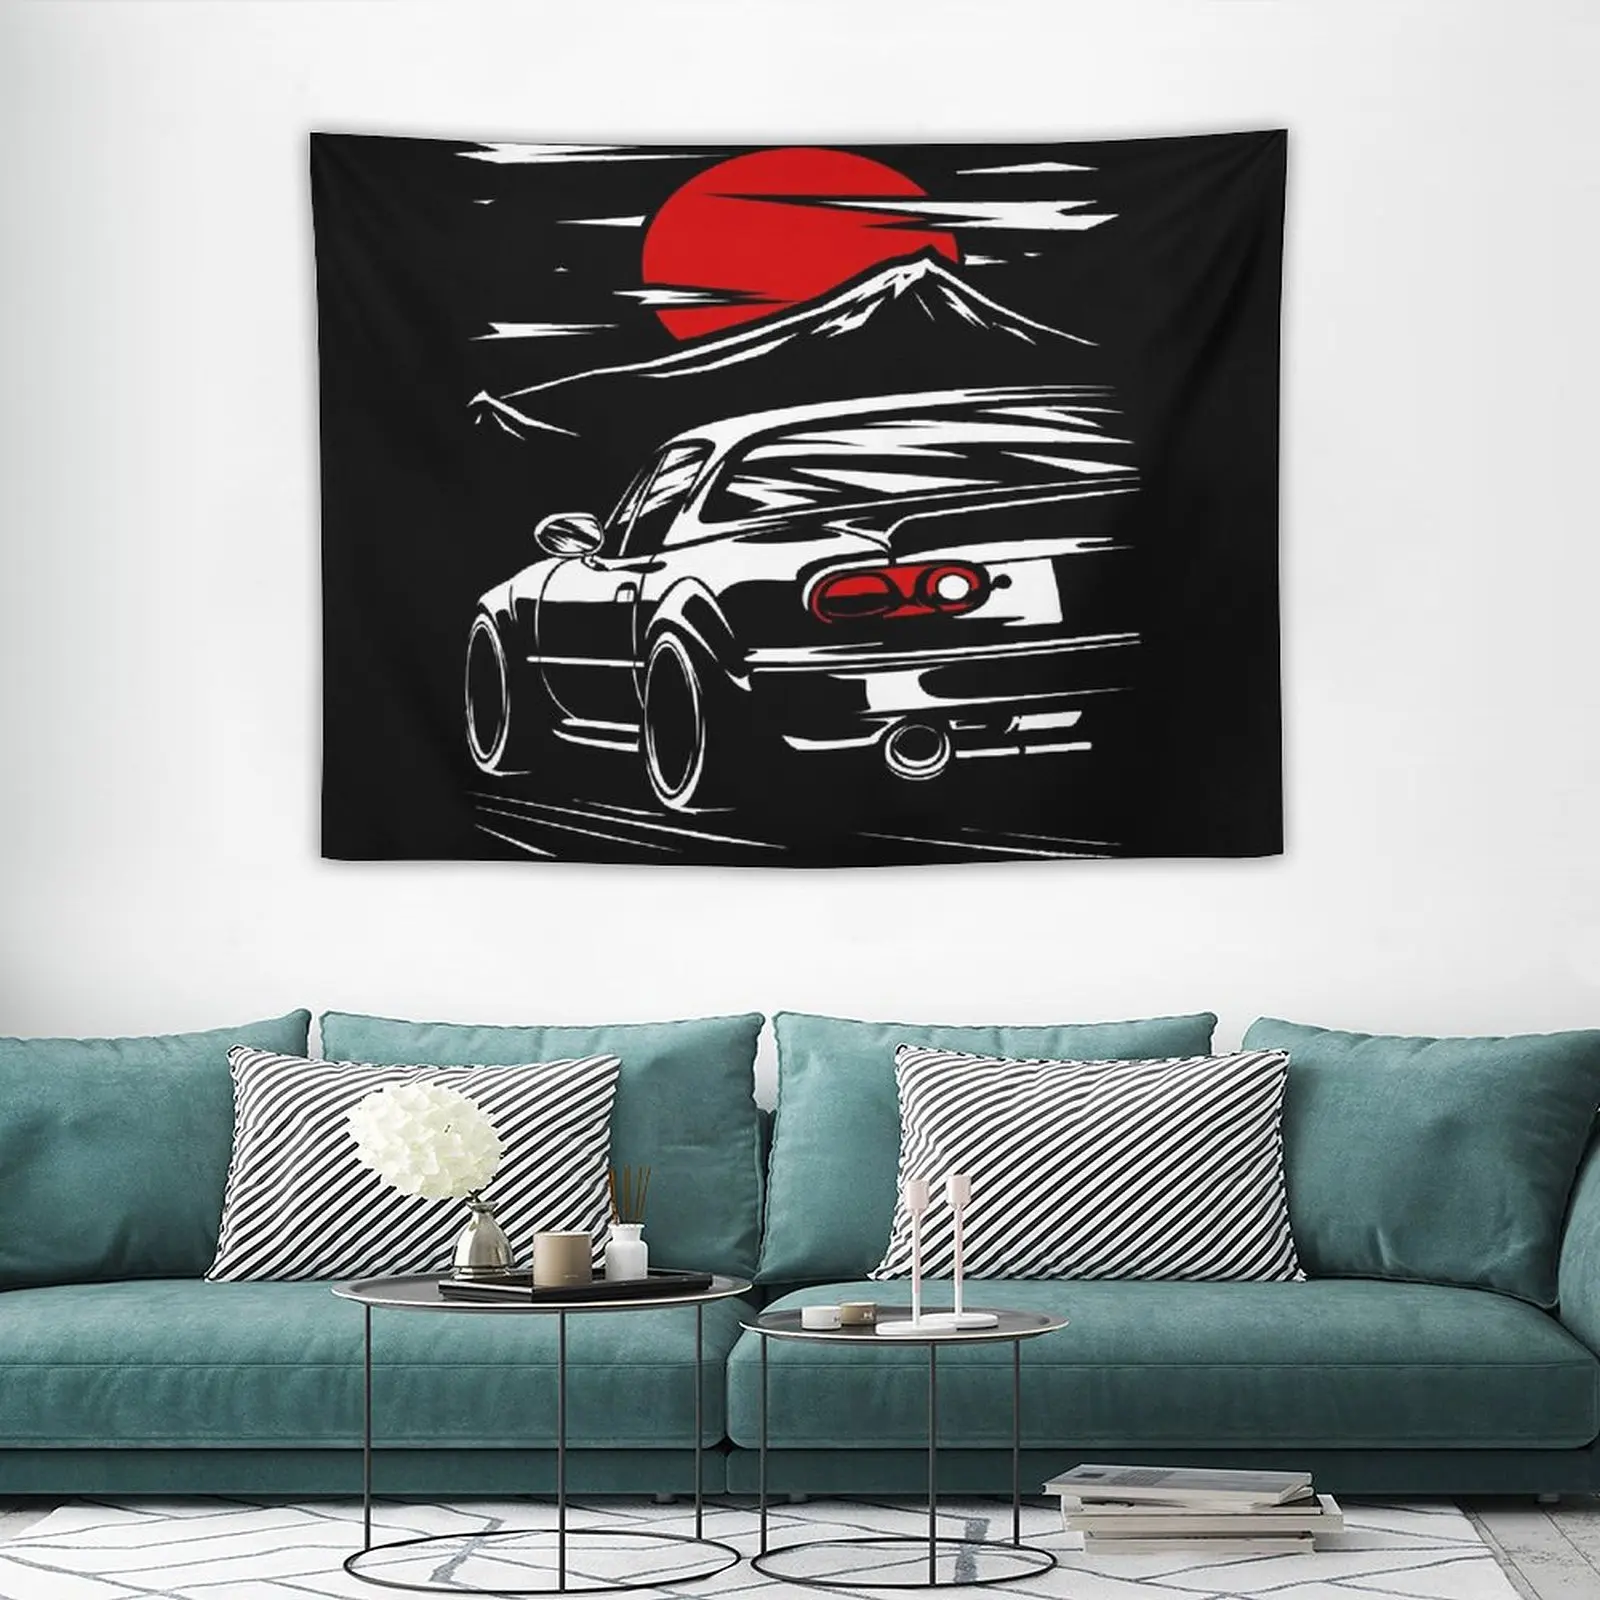 

Christmas Tapestry for Wall Bastet MX-5 Miata Tapestry Aesthetic Room Deco Myth Cloth Ex Decoration Wall